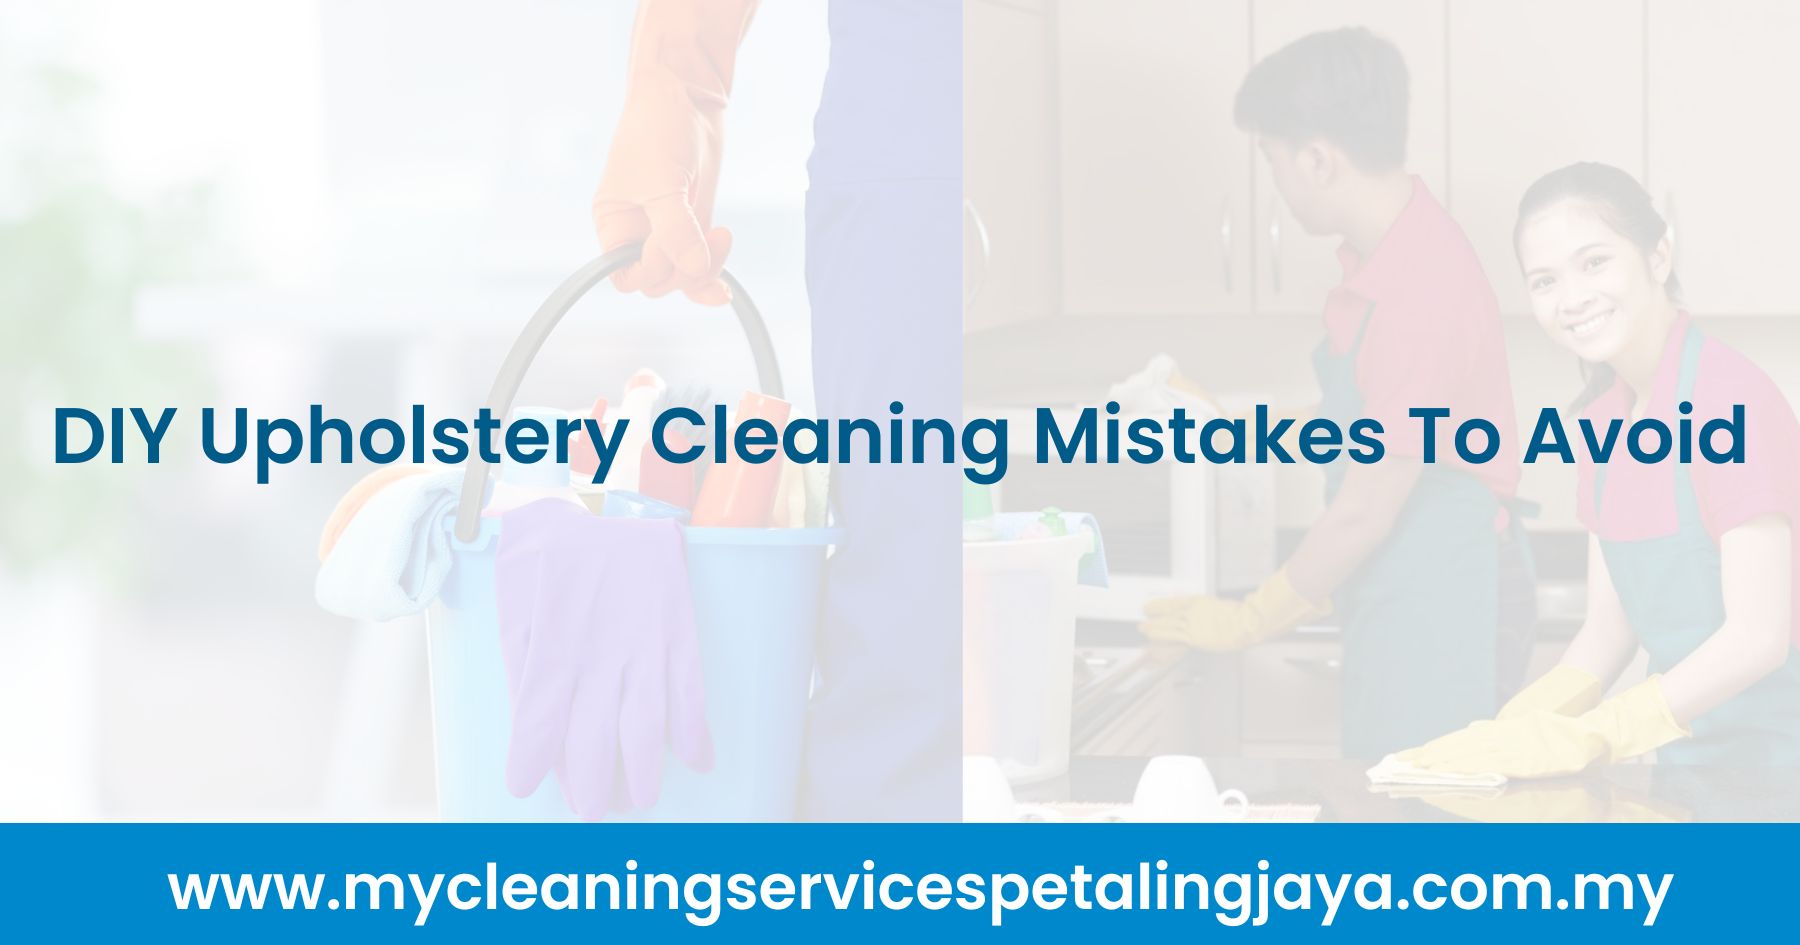 DIY Upholstery Cleaning Mistakes to Avoid